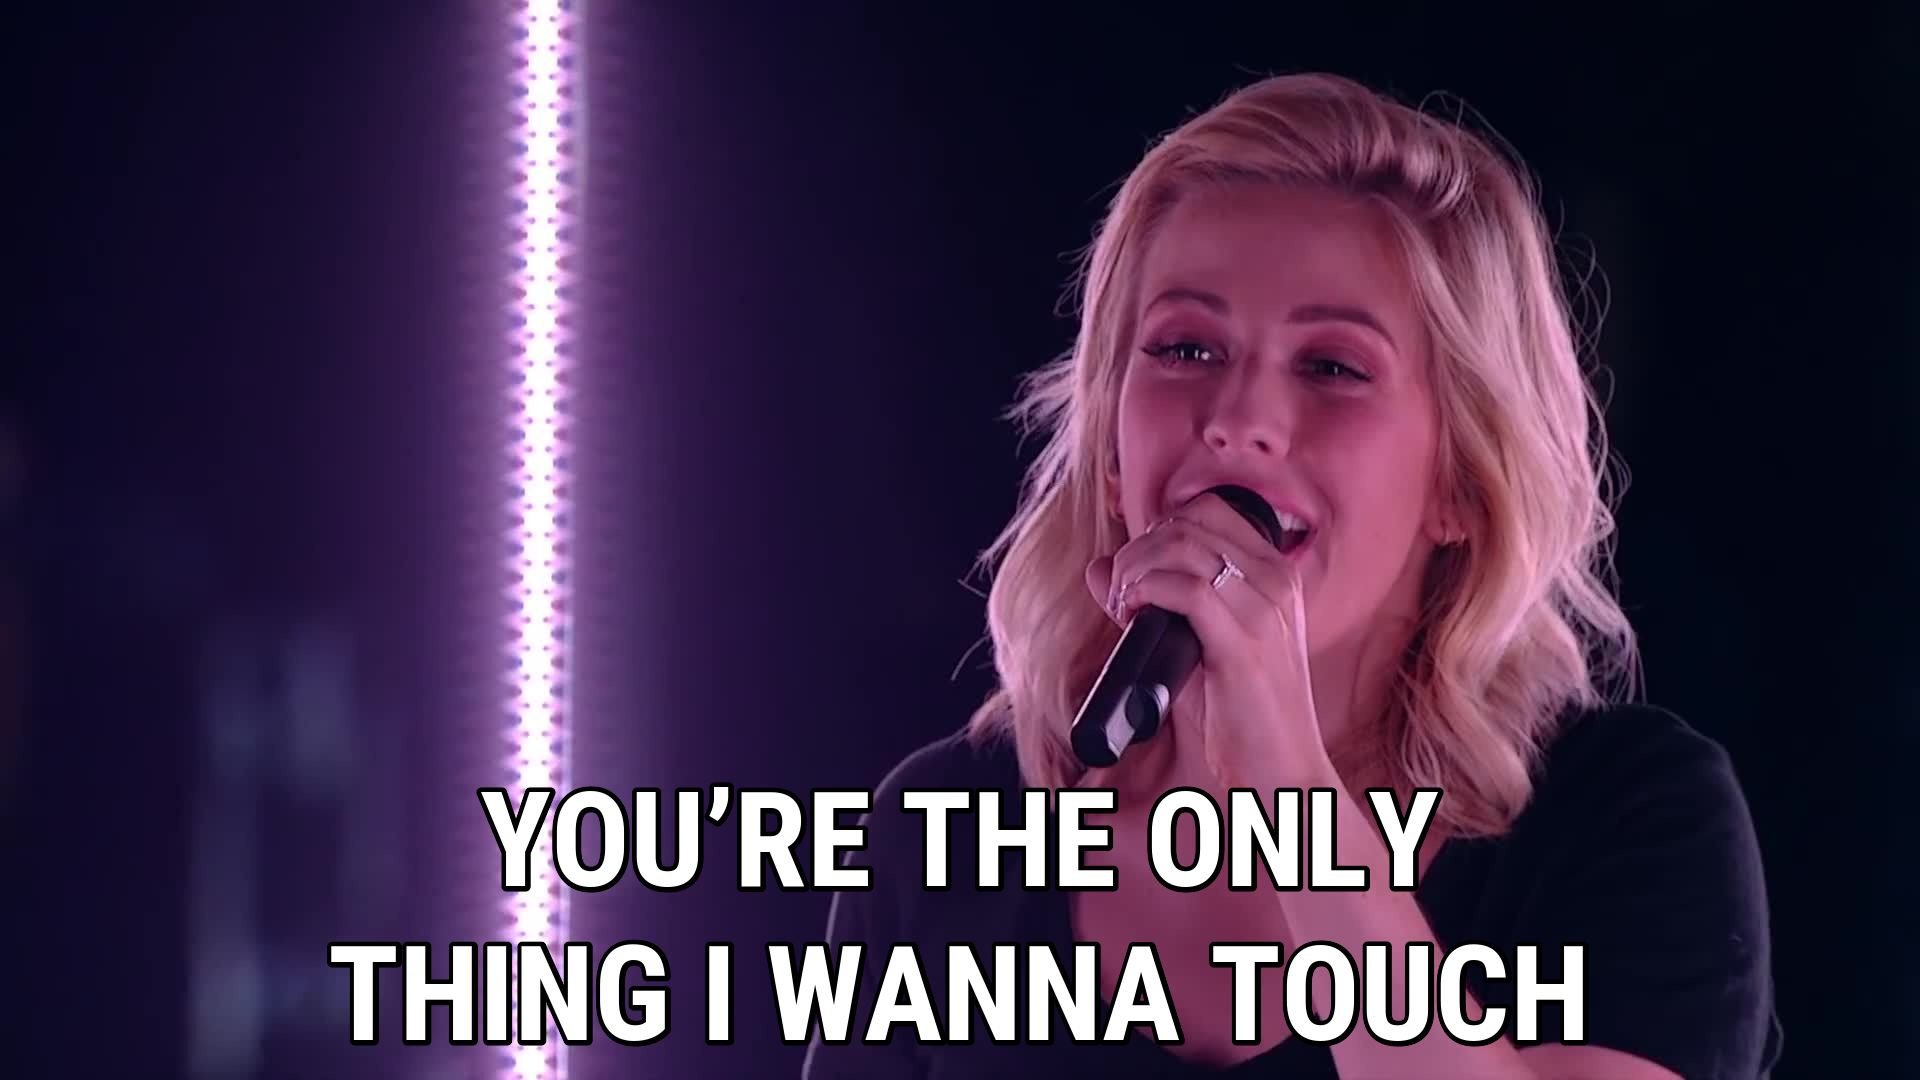 You're The Only Thing I Wanna Touch / Ellie Goulding - You Are Only Thing I Wanna To Touch , HD Wallpaper & Backgrounds